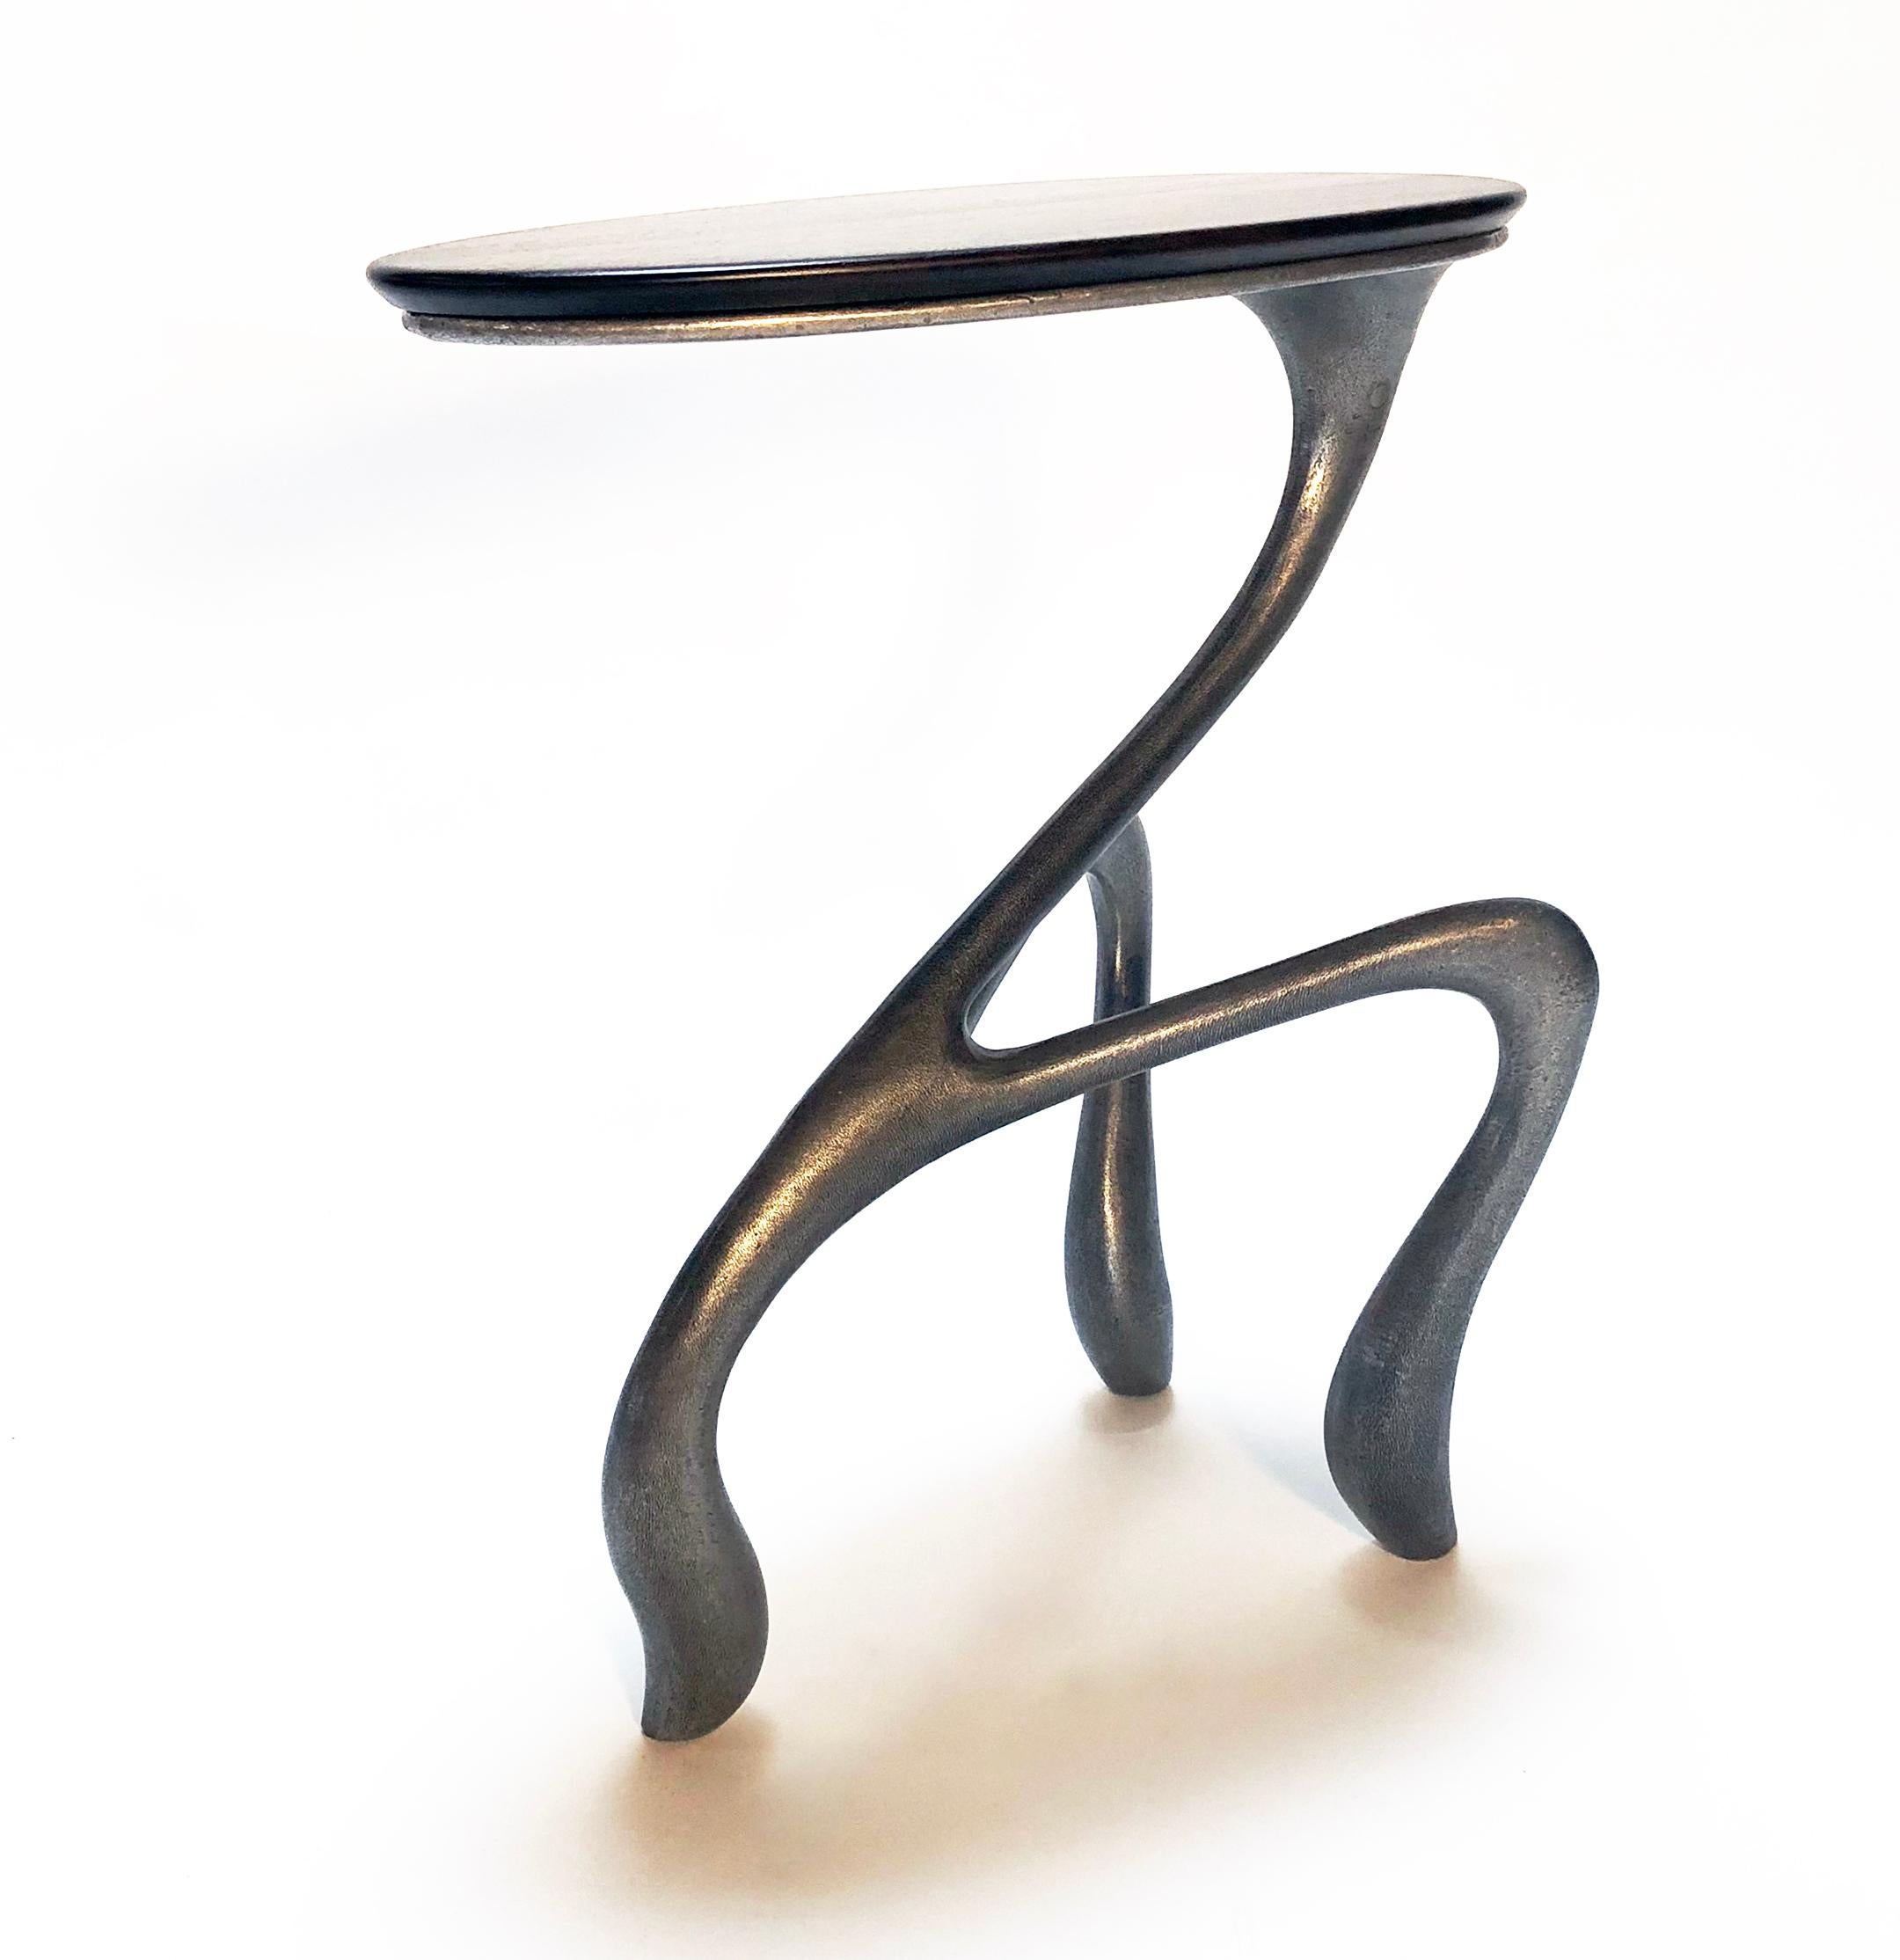 Jordan Mozer (b.1958), Goosegūß Side Table / Occasional Table, Cast Recycled Aluminum + Wisconsin Black Walnut, Made in Chicago, 2004 / 2018. Collection of the artist. Signed.  Measurements: 19